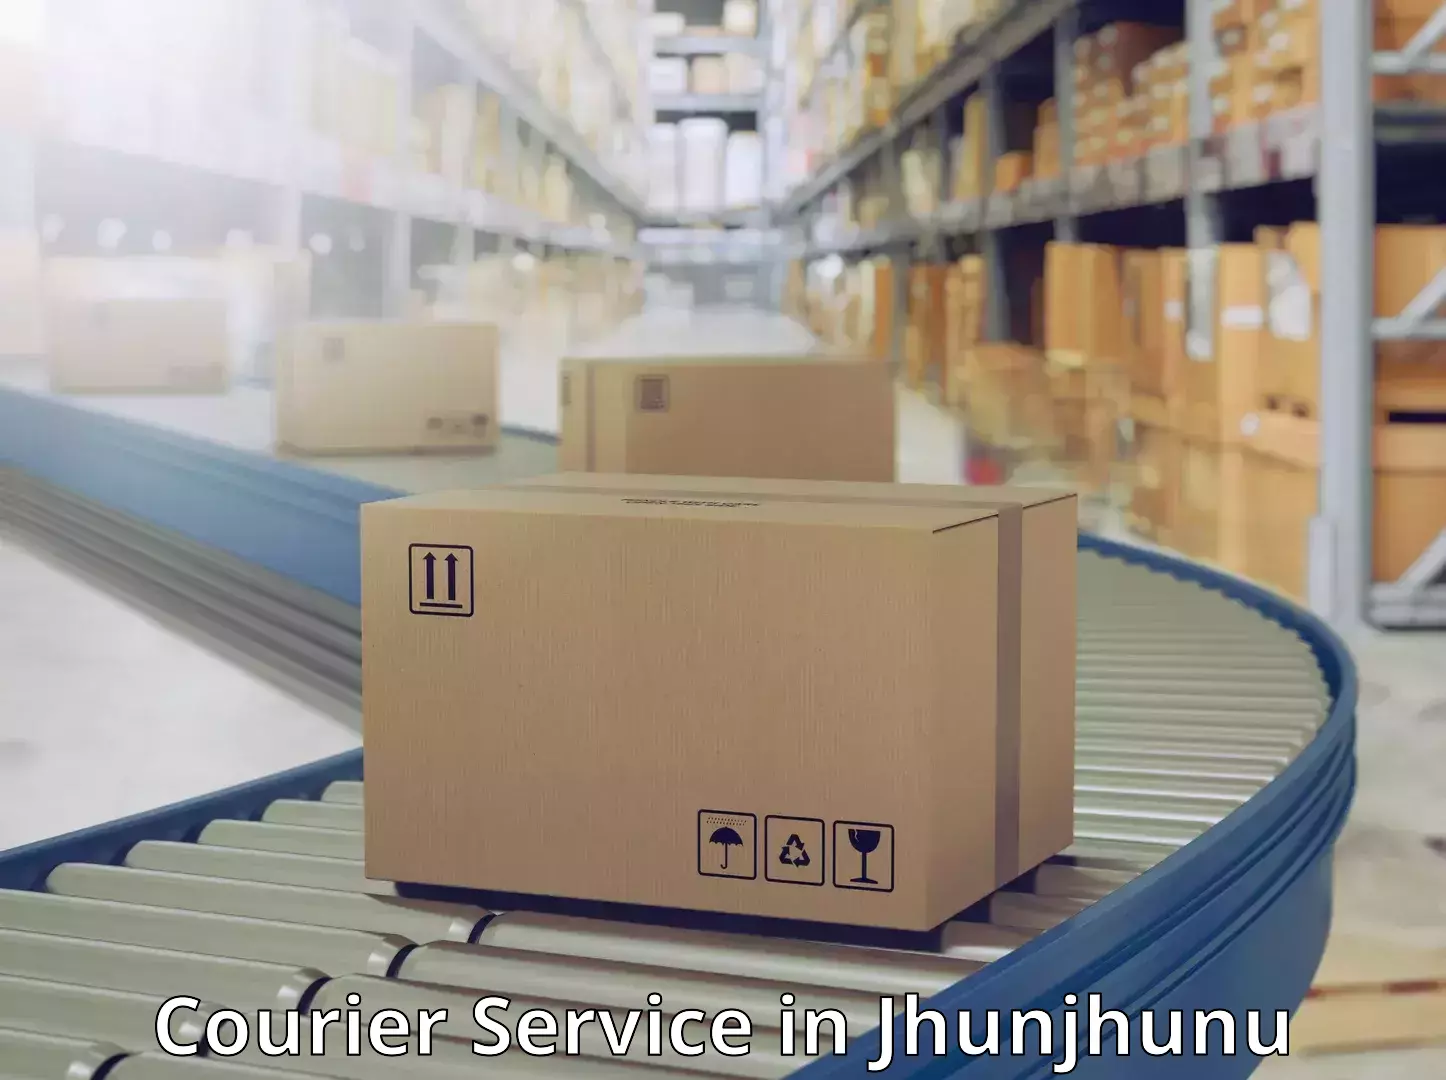 Round-the-clock parcel delivery in Jhunjhunu